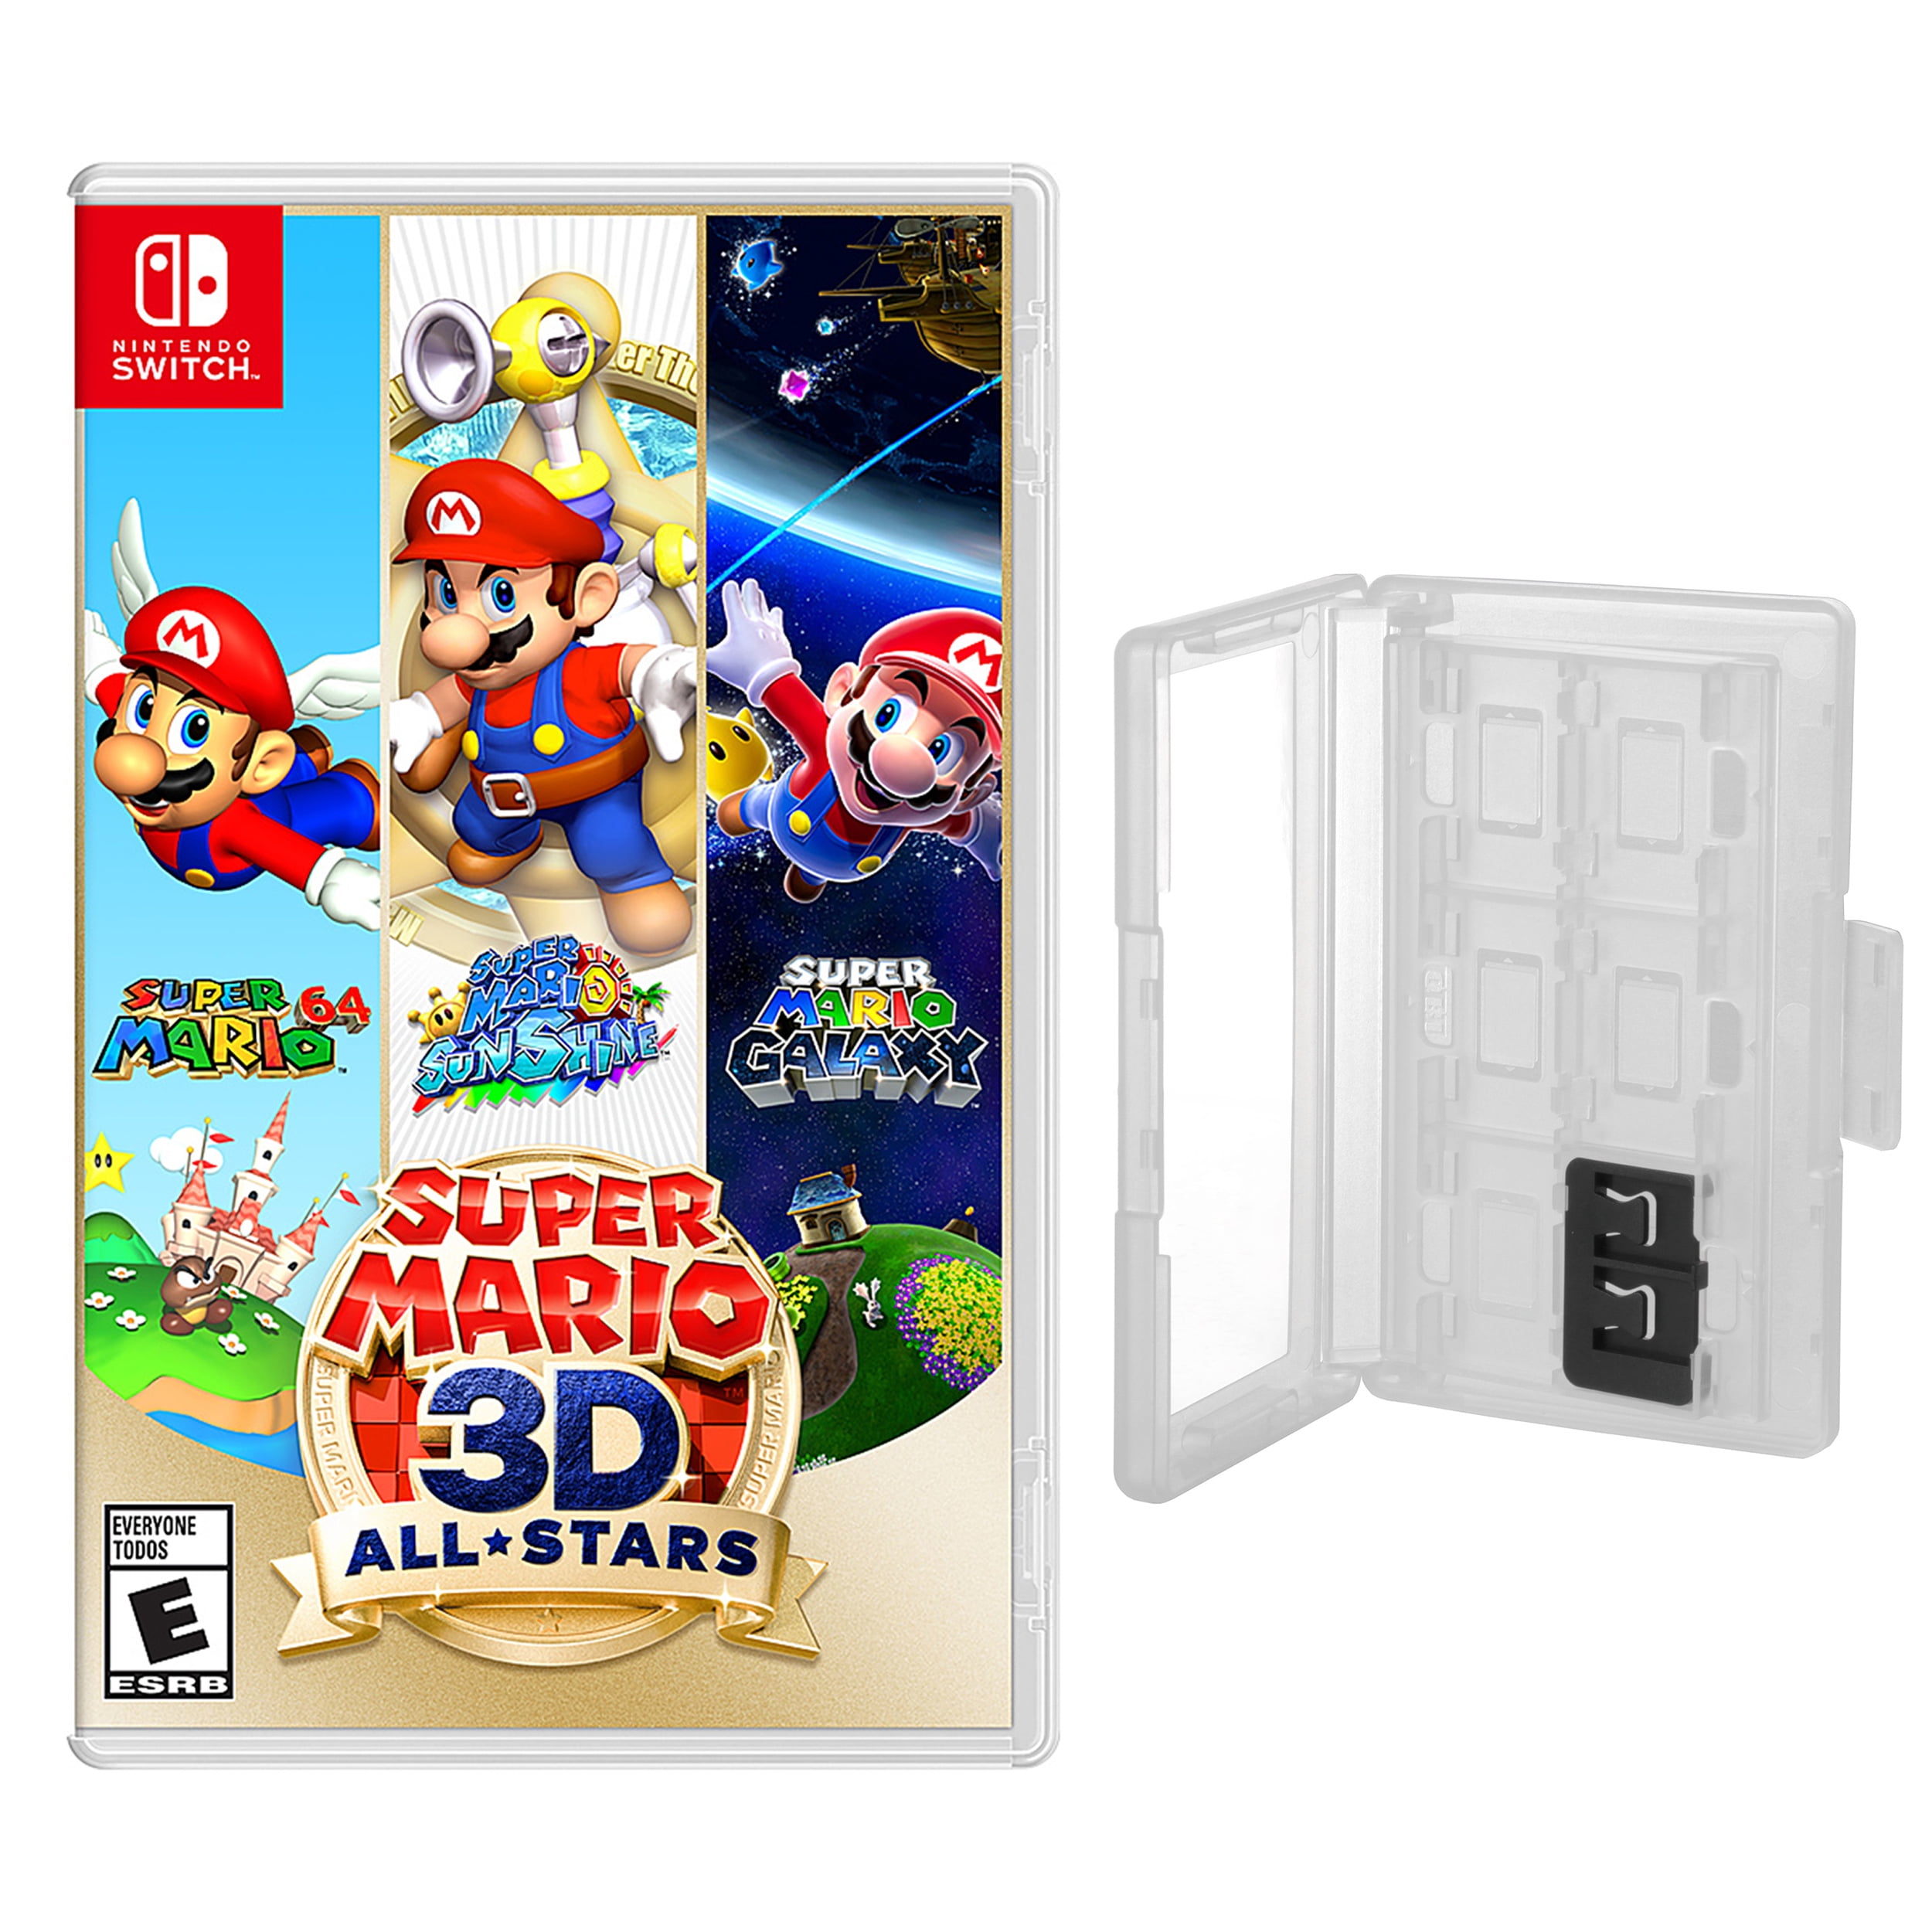 Super Mario 3D All Stars and Game Caddy for the Nintendo Switch 